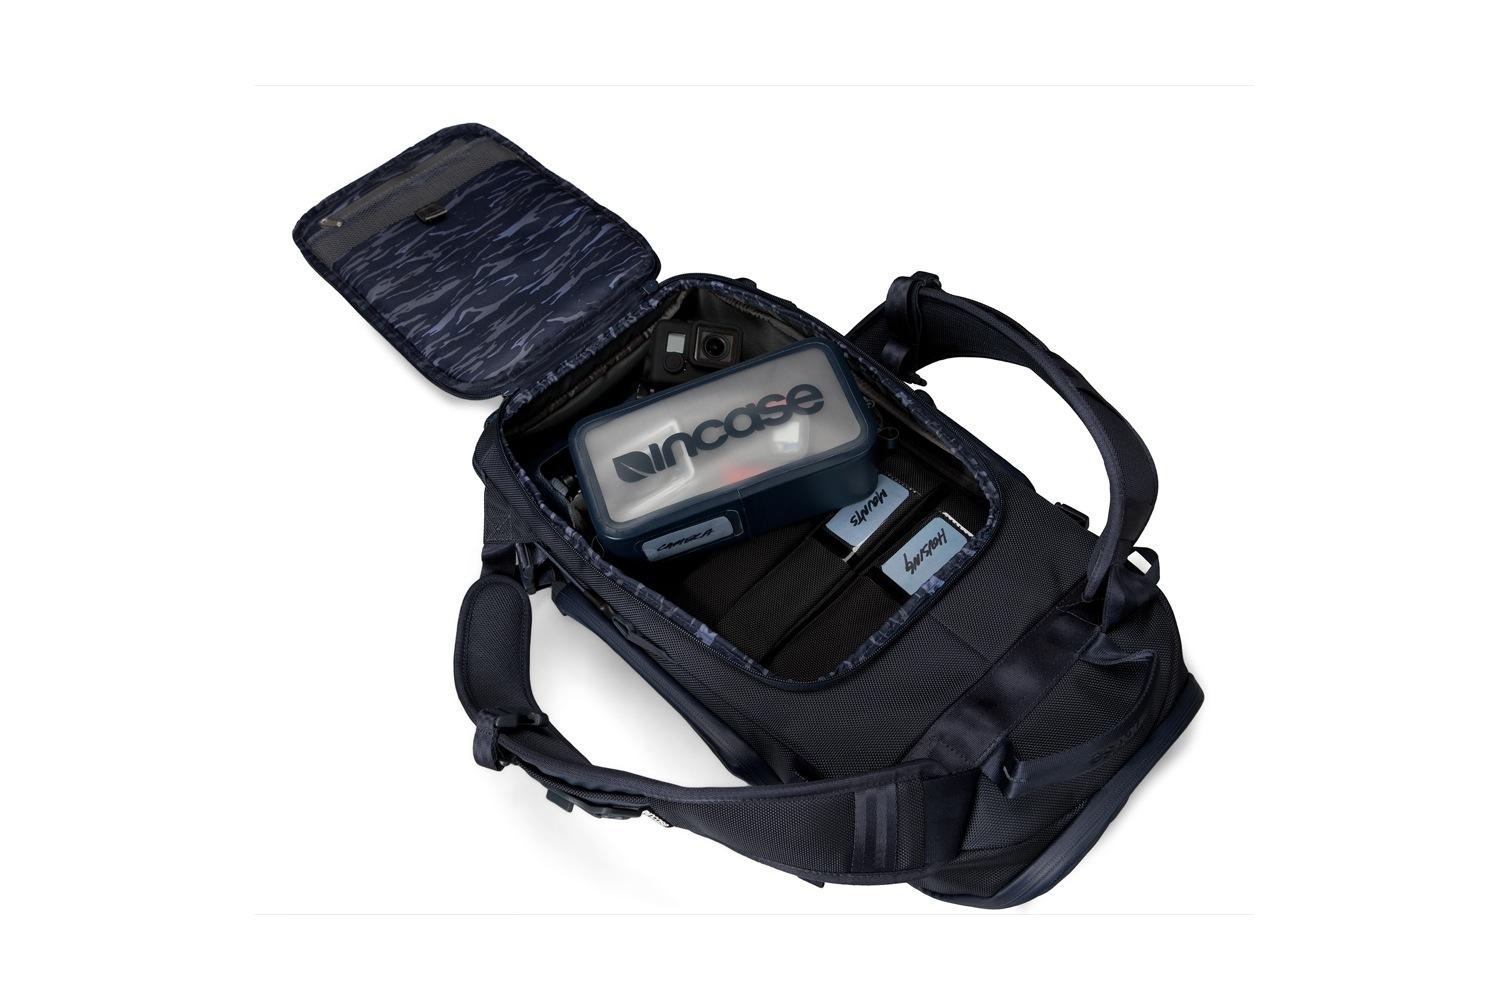 incases new gopro backpack pays homage to pro surfer kelly slater incase 6